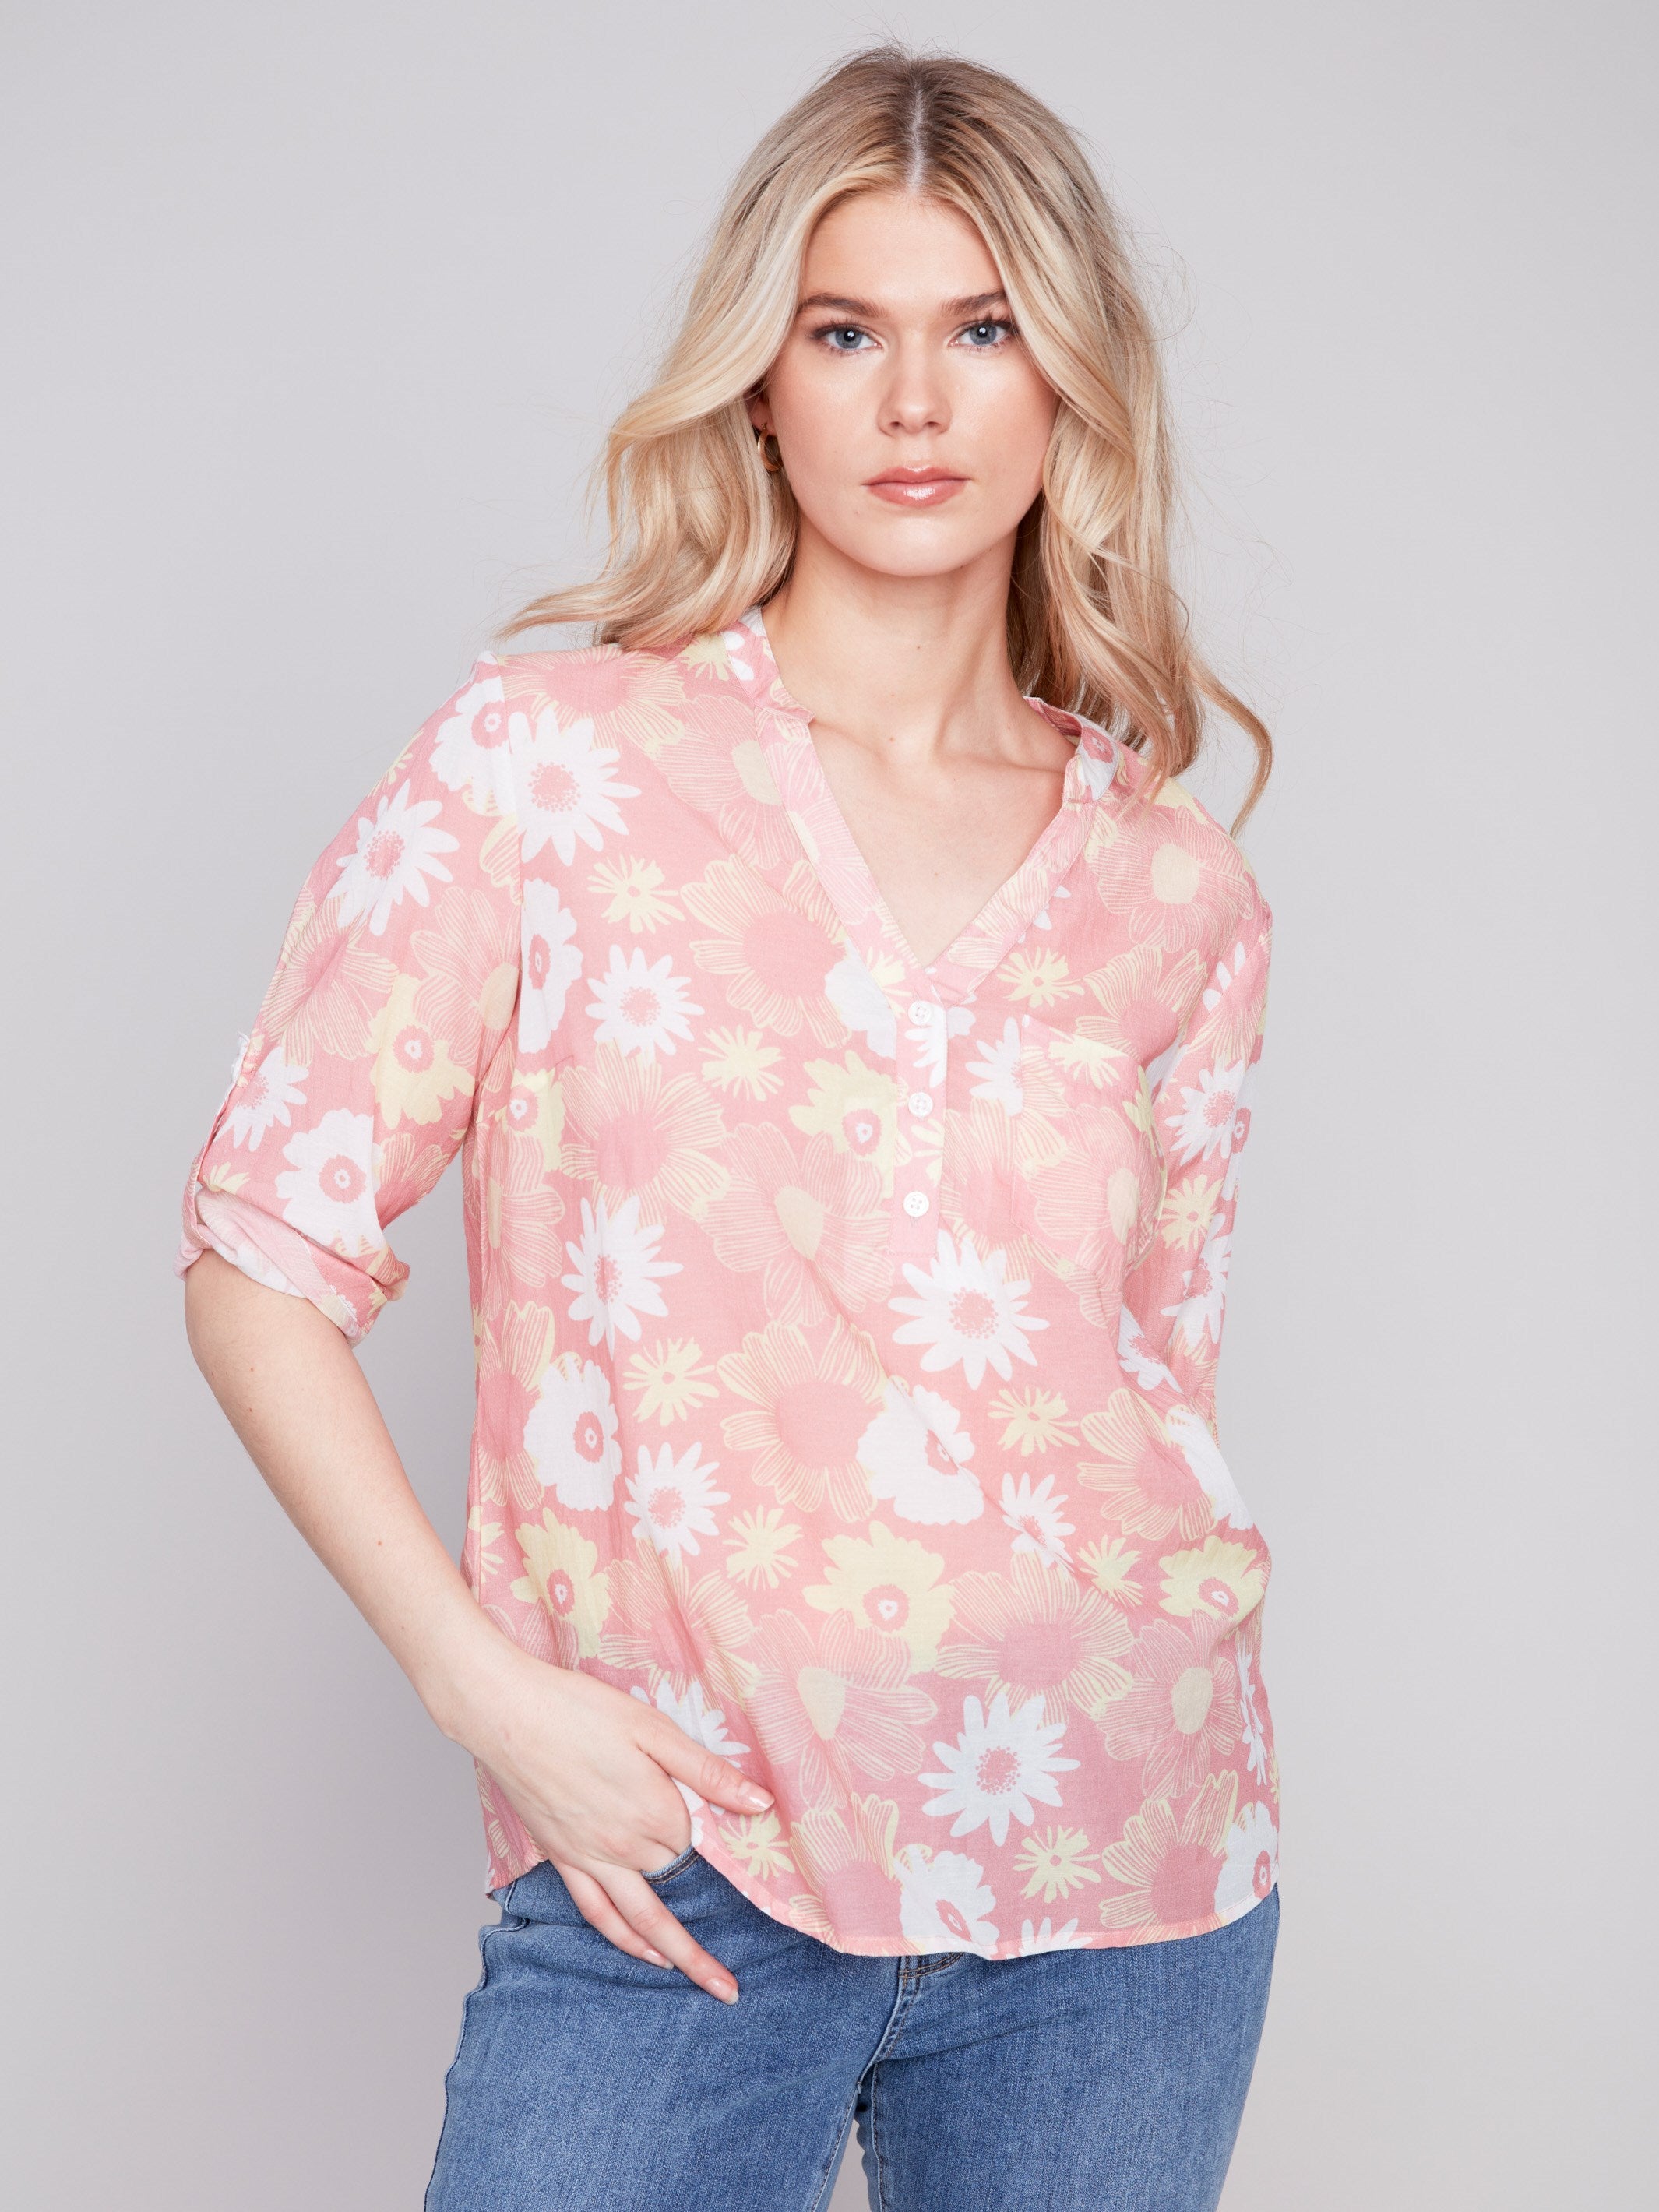 Printed Half-Button Blouse - Cosmos - Charlie B Collection Canada - Image 1